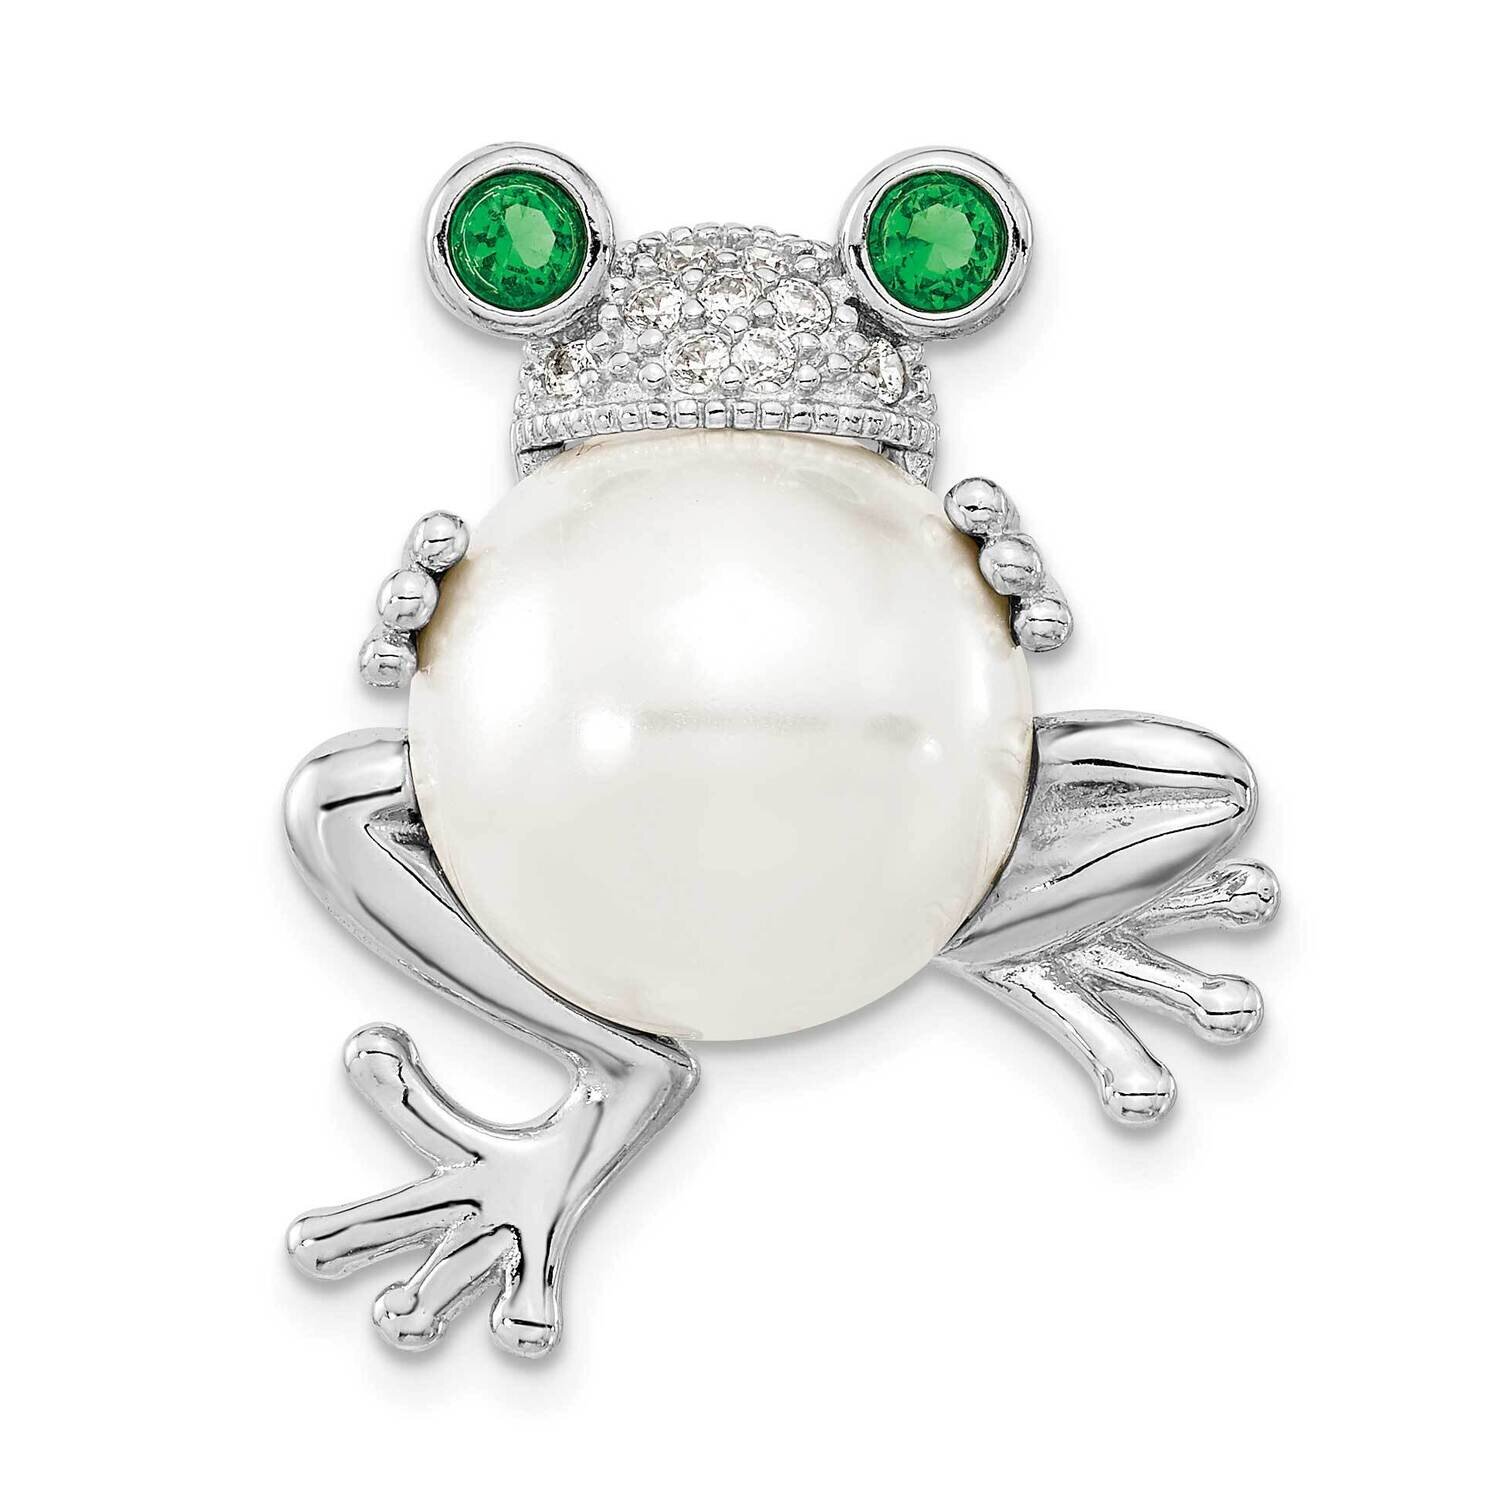 Cheryl M Rhodium-Plated CZ Diamond and Cultured Freshwater Pearl Frog Pin Pendant Sterling Silver QCM1507